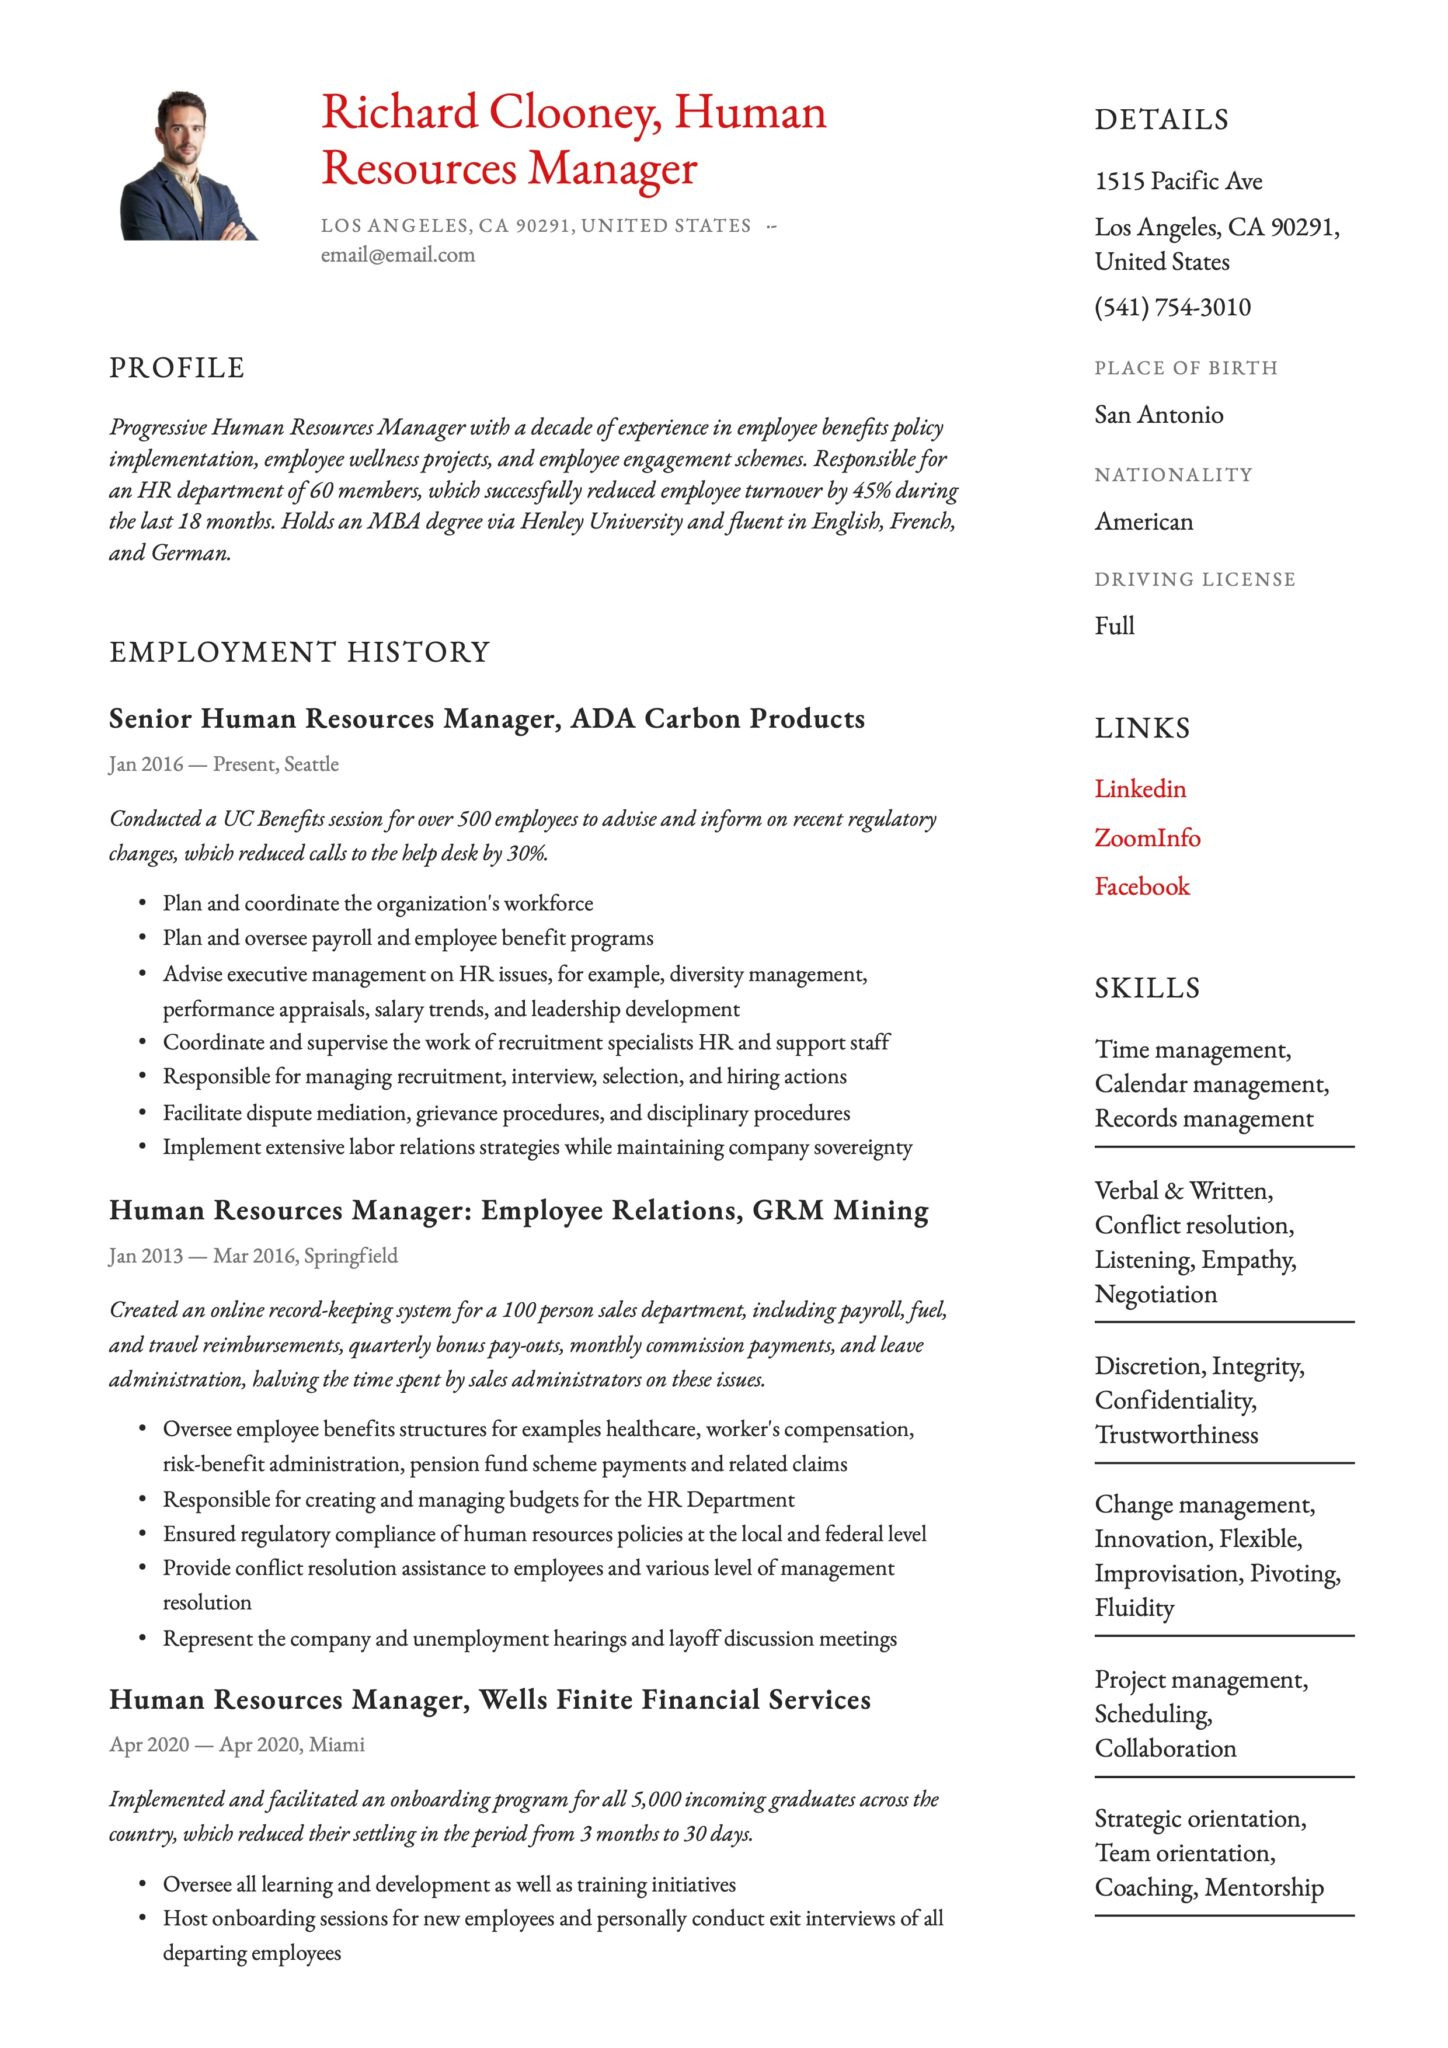 Sample Of Human Resources Specialist Resumes 17 Human Resources Manager Resumes & Guide 2020